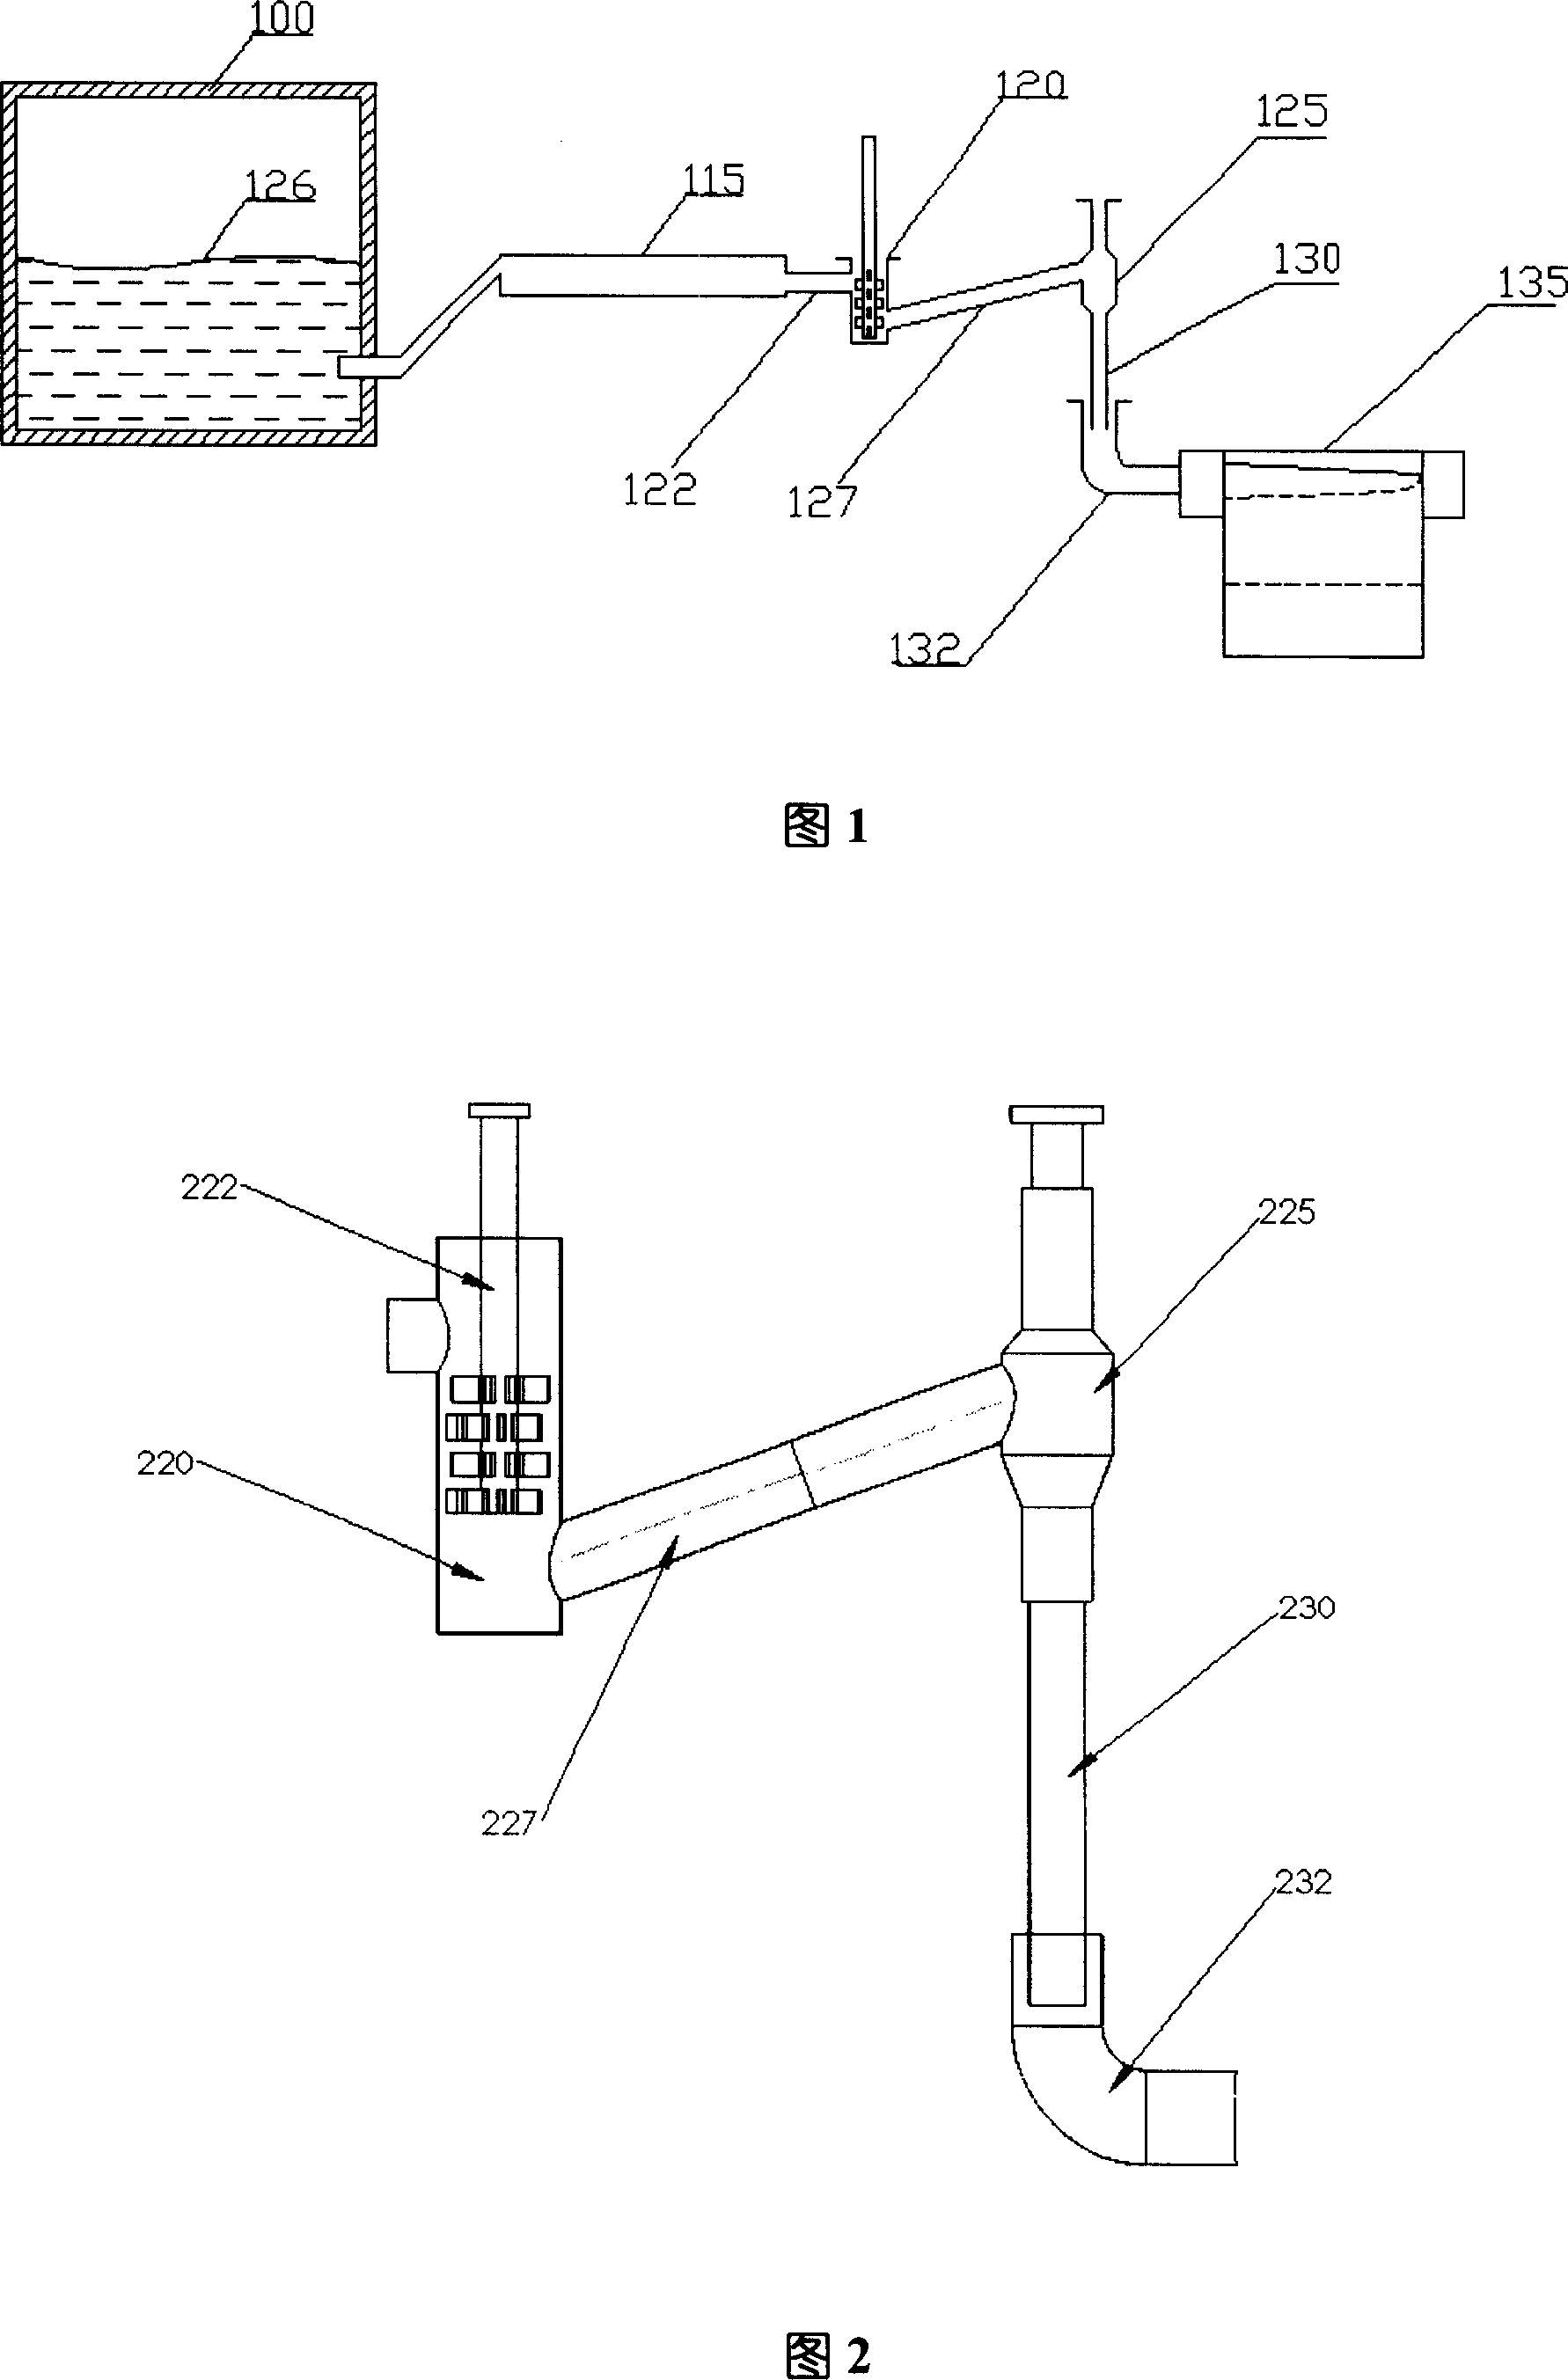 Glass material feeding method and device for controlling and regulating glass flow rate